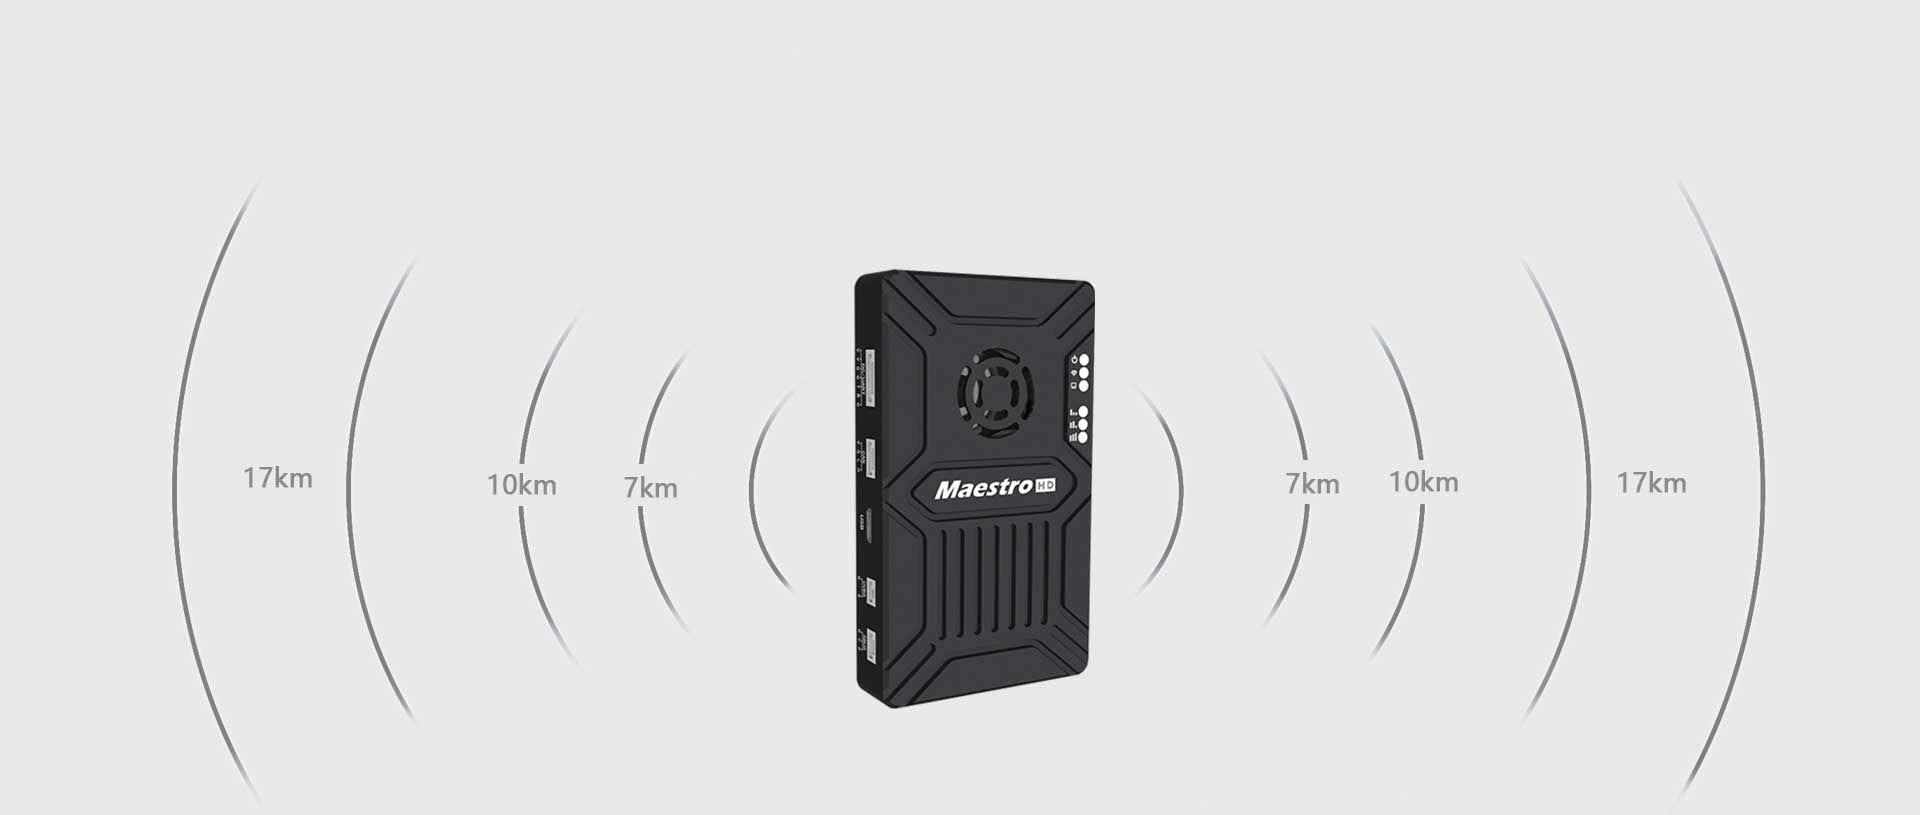 Maestro M50/M51, Wireless transmission system for Maestro M50/51 supports up to 17km distance with three frequency bands.